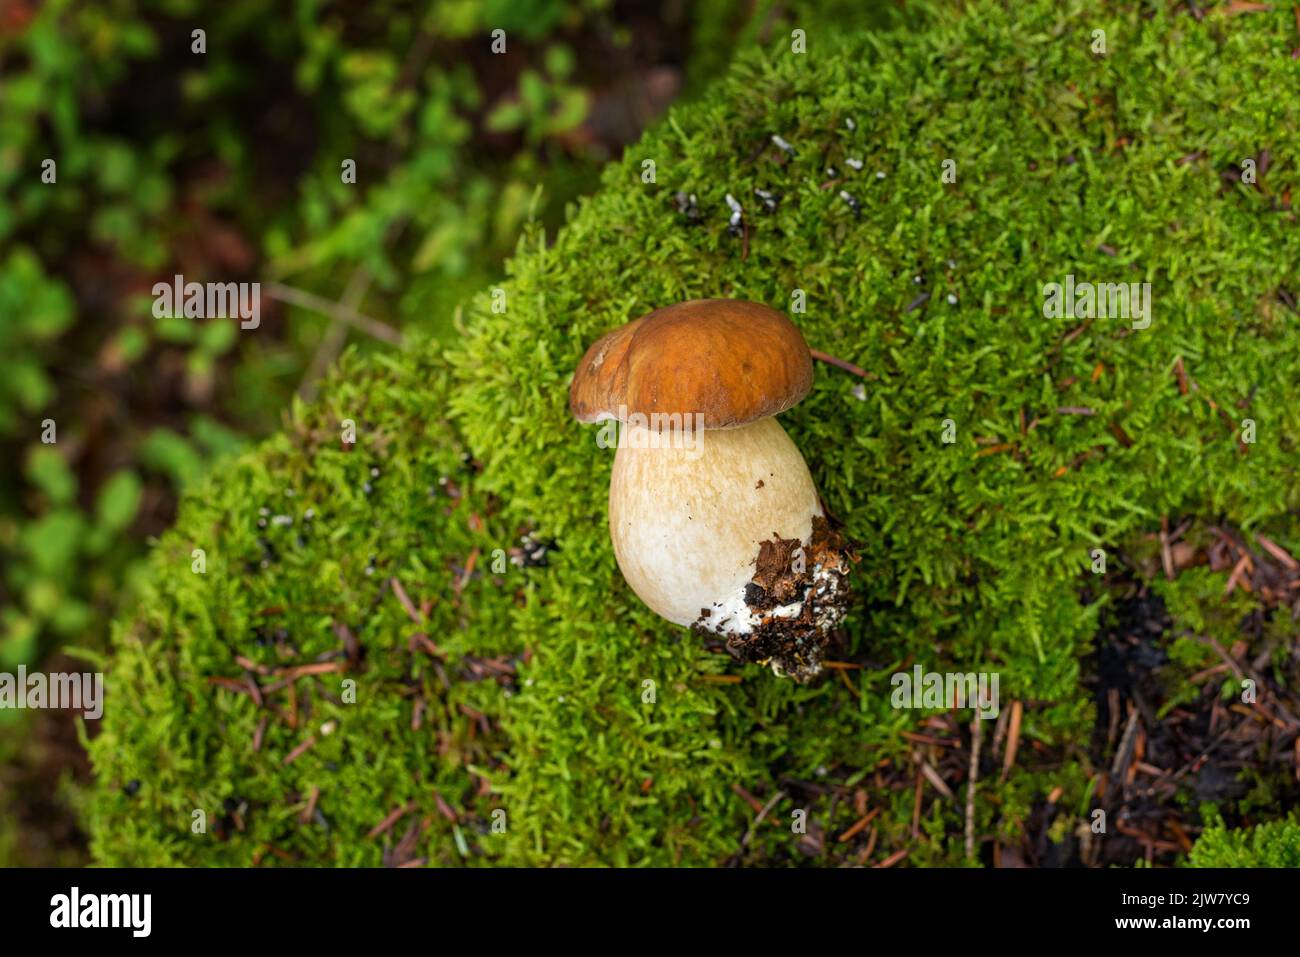 Small boletus mushroom plucked from the ground and placed on a stump with moss Stock Photo